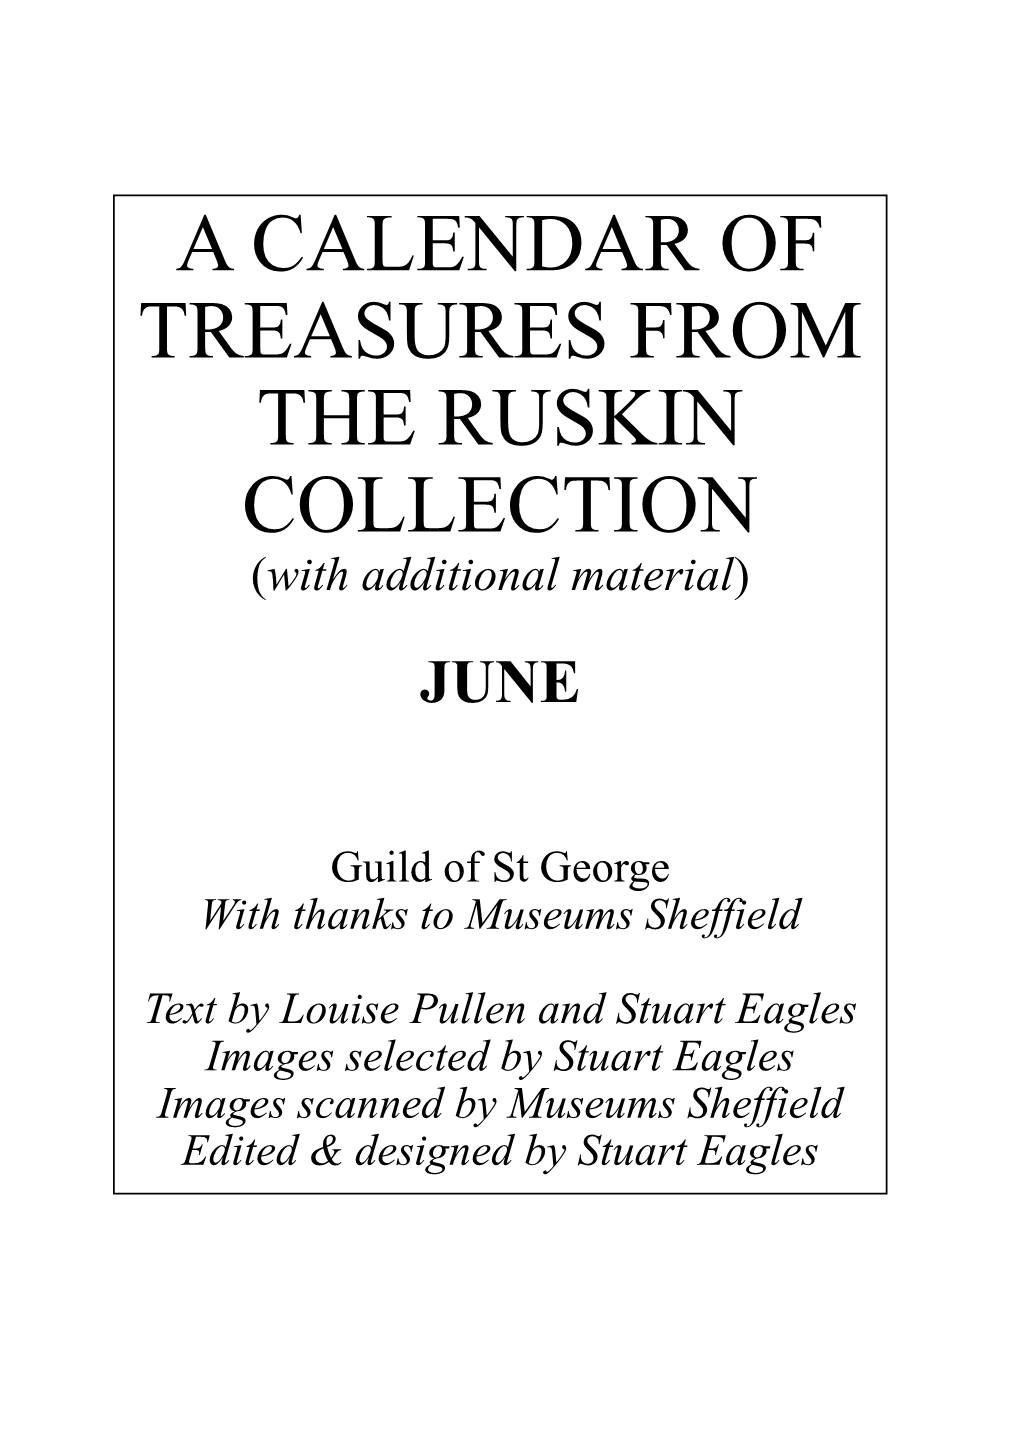 A CALENDAR of TREASURES from the RUSKIN COLLECTION (With Additional Material)